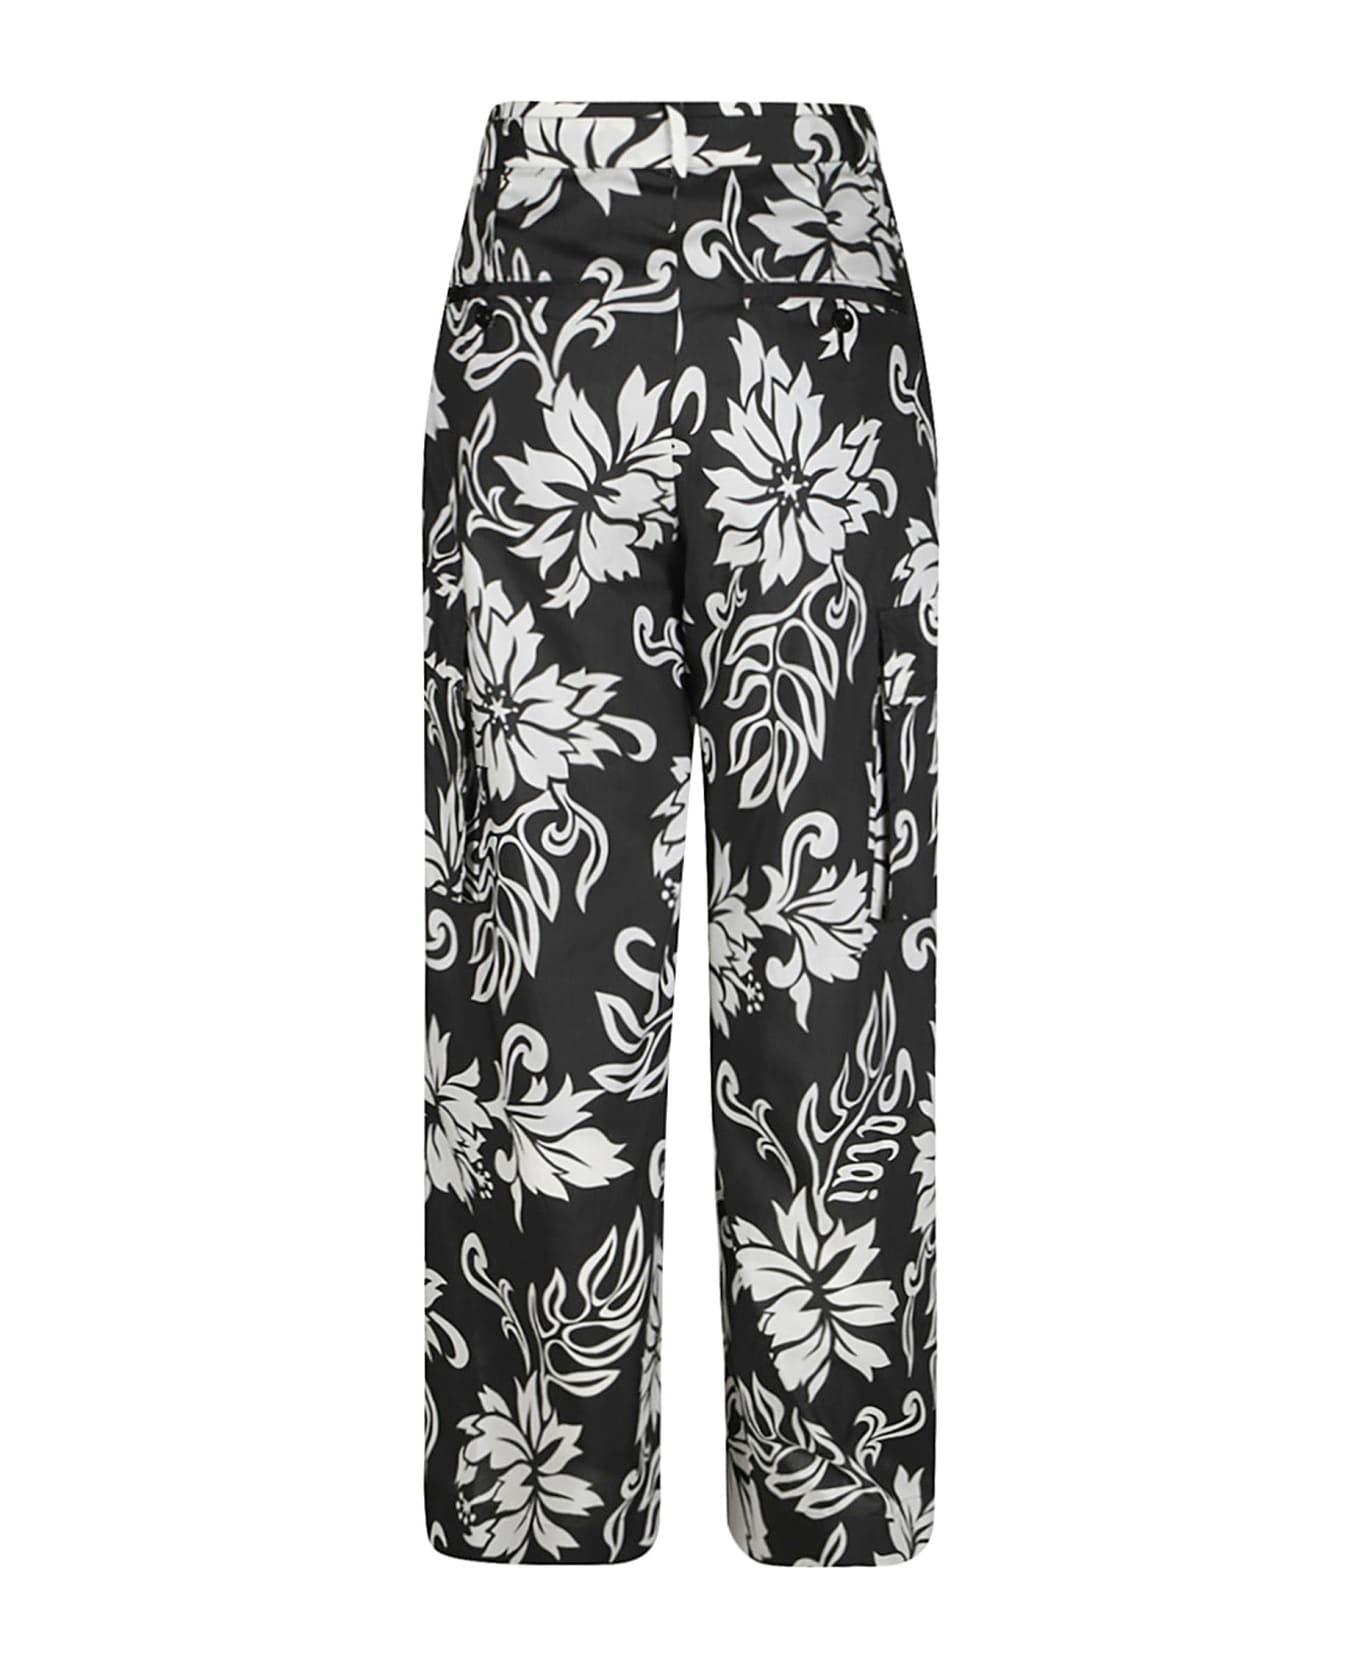 Sacai Printed Belted Trousers - Black